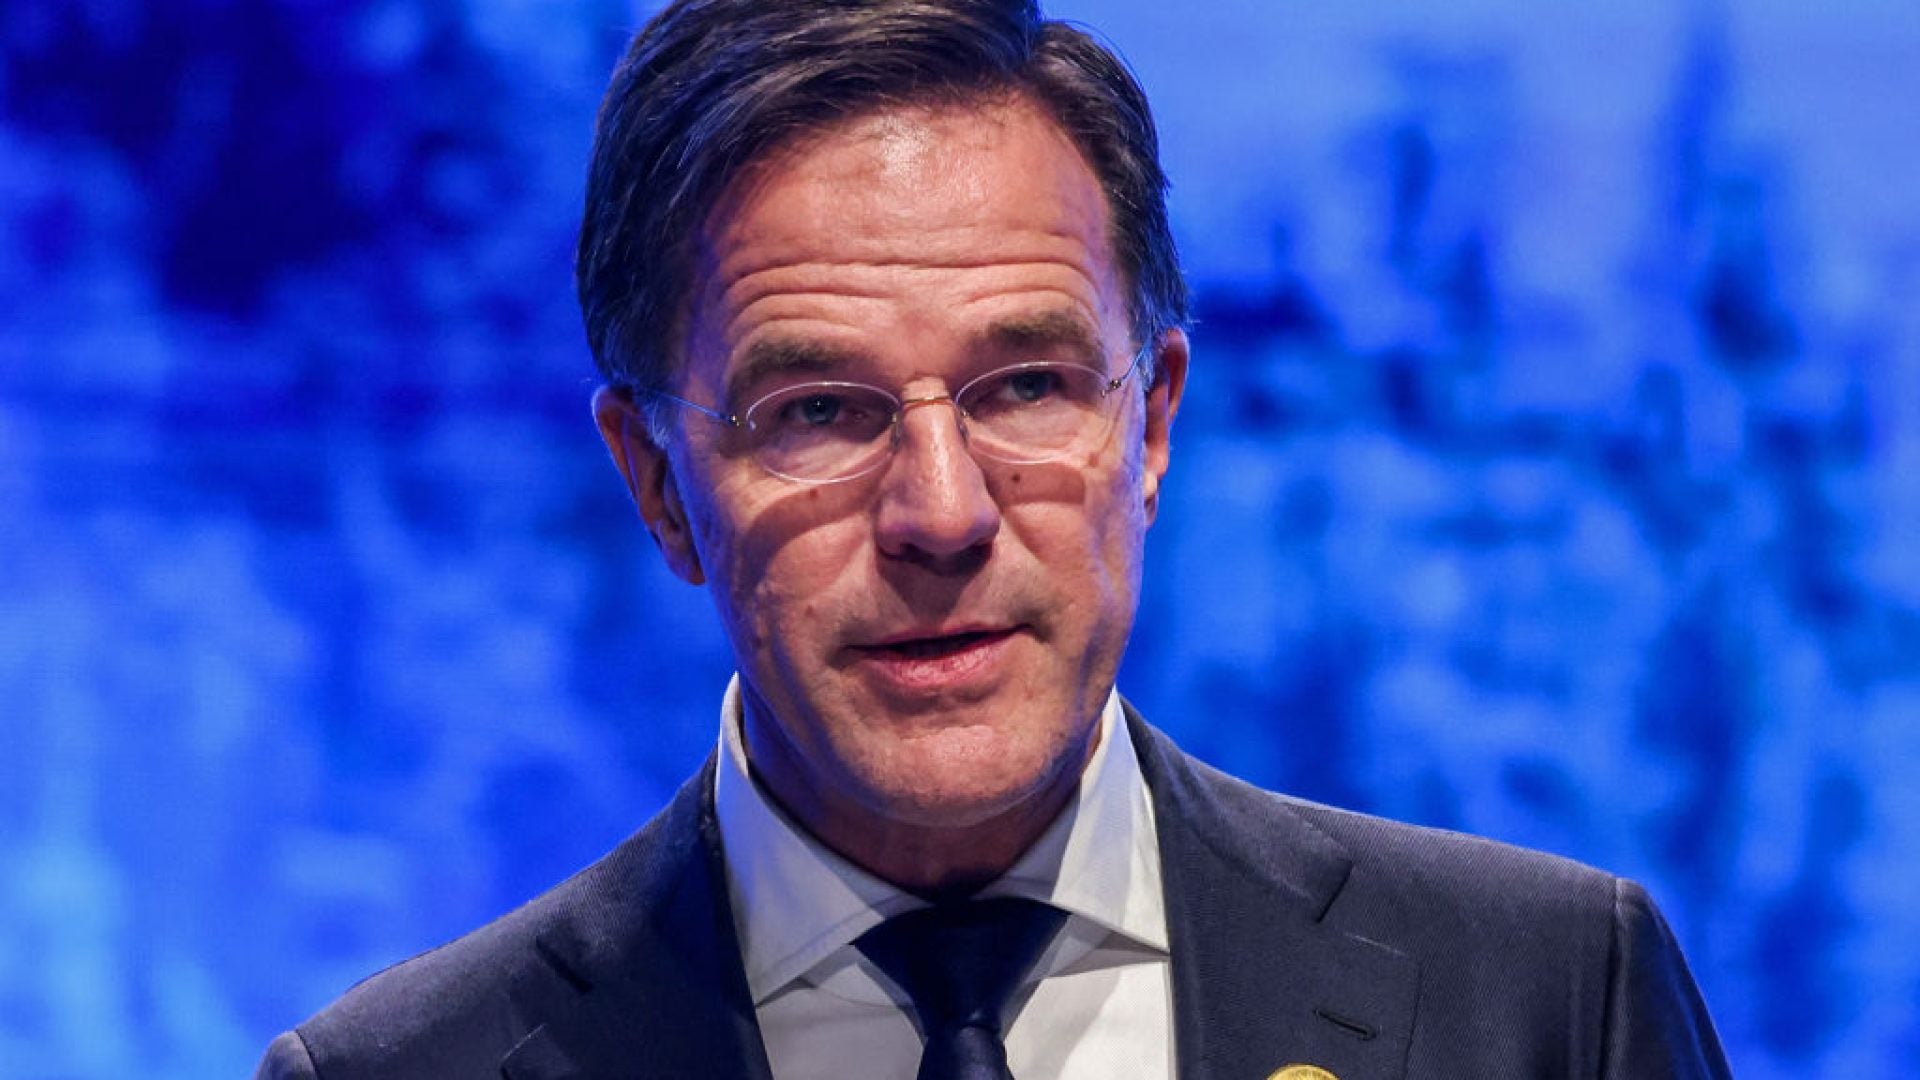 Dutch Prime Minister Apologizes For Netherlands' Role In Slave Trade